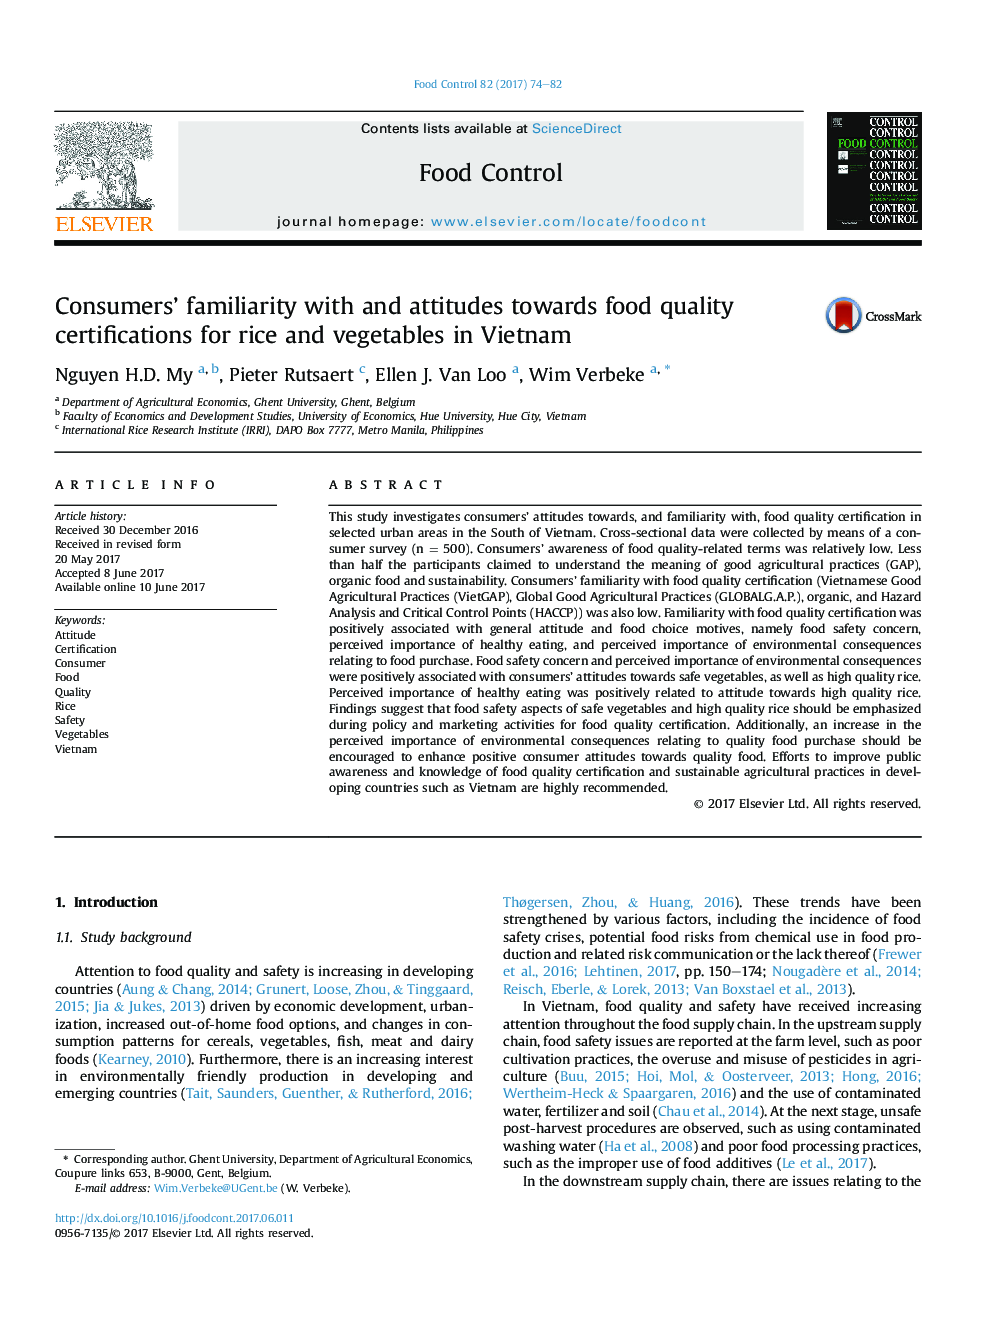 Consumers' familiarity with and attitudes towards food quality certifications for rice and vegetables in Vietnam